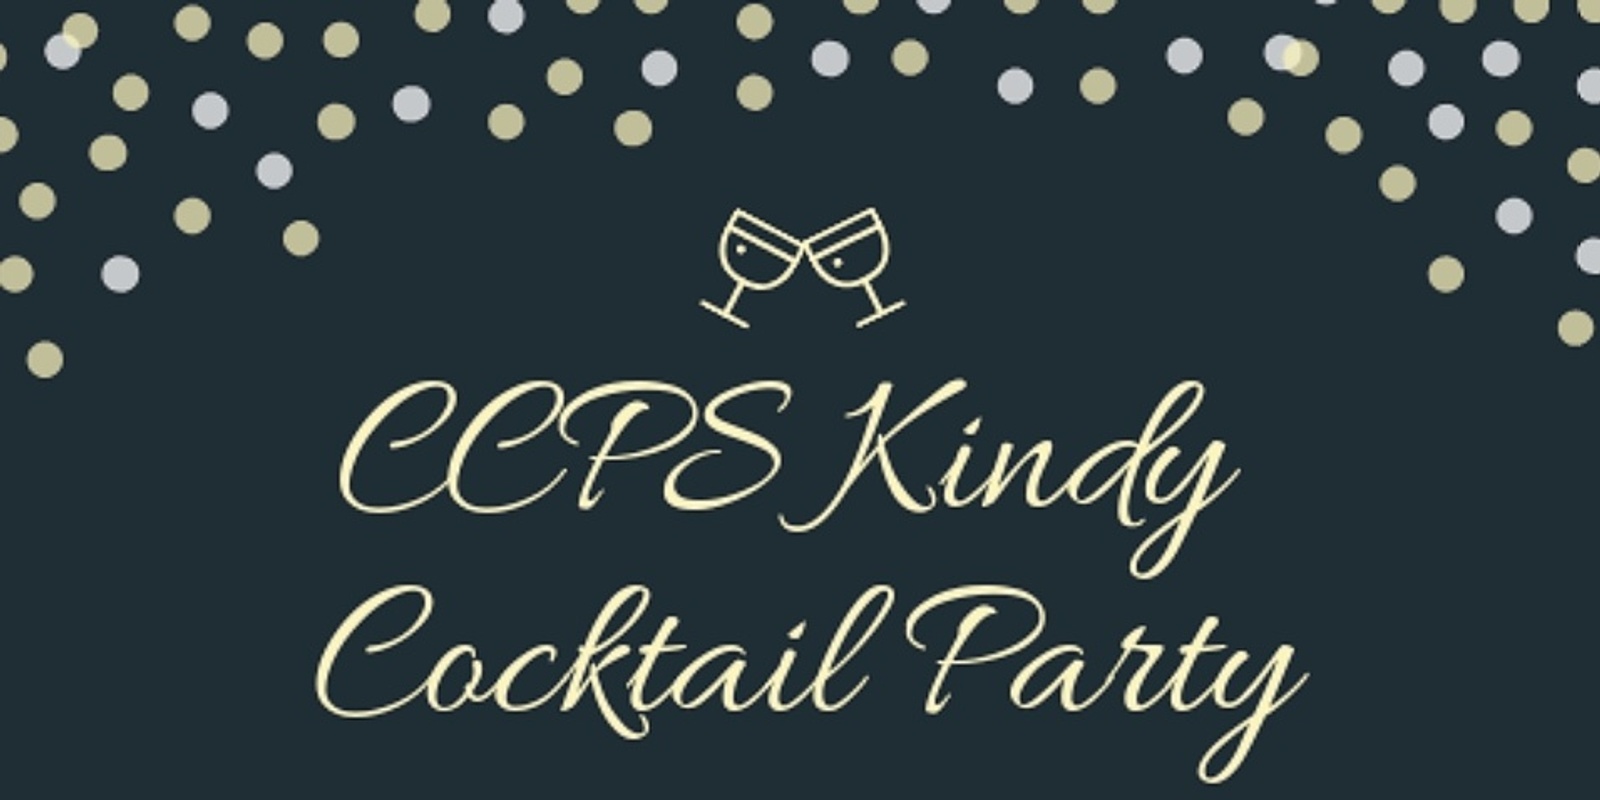 Banner image for CCPS Kindy Cocktail Party 2020